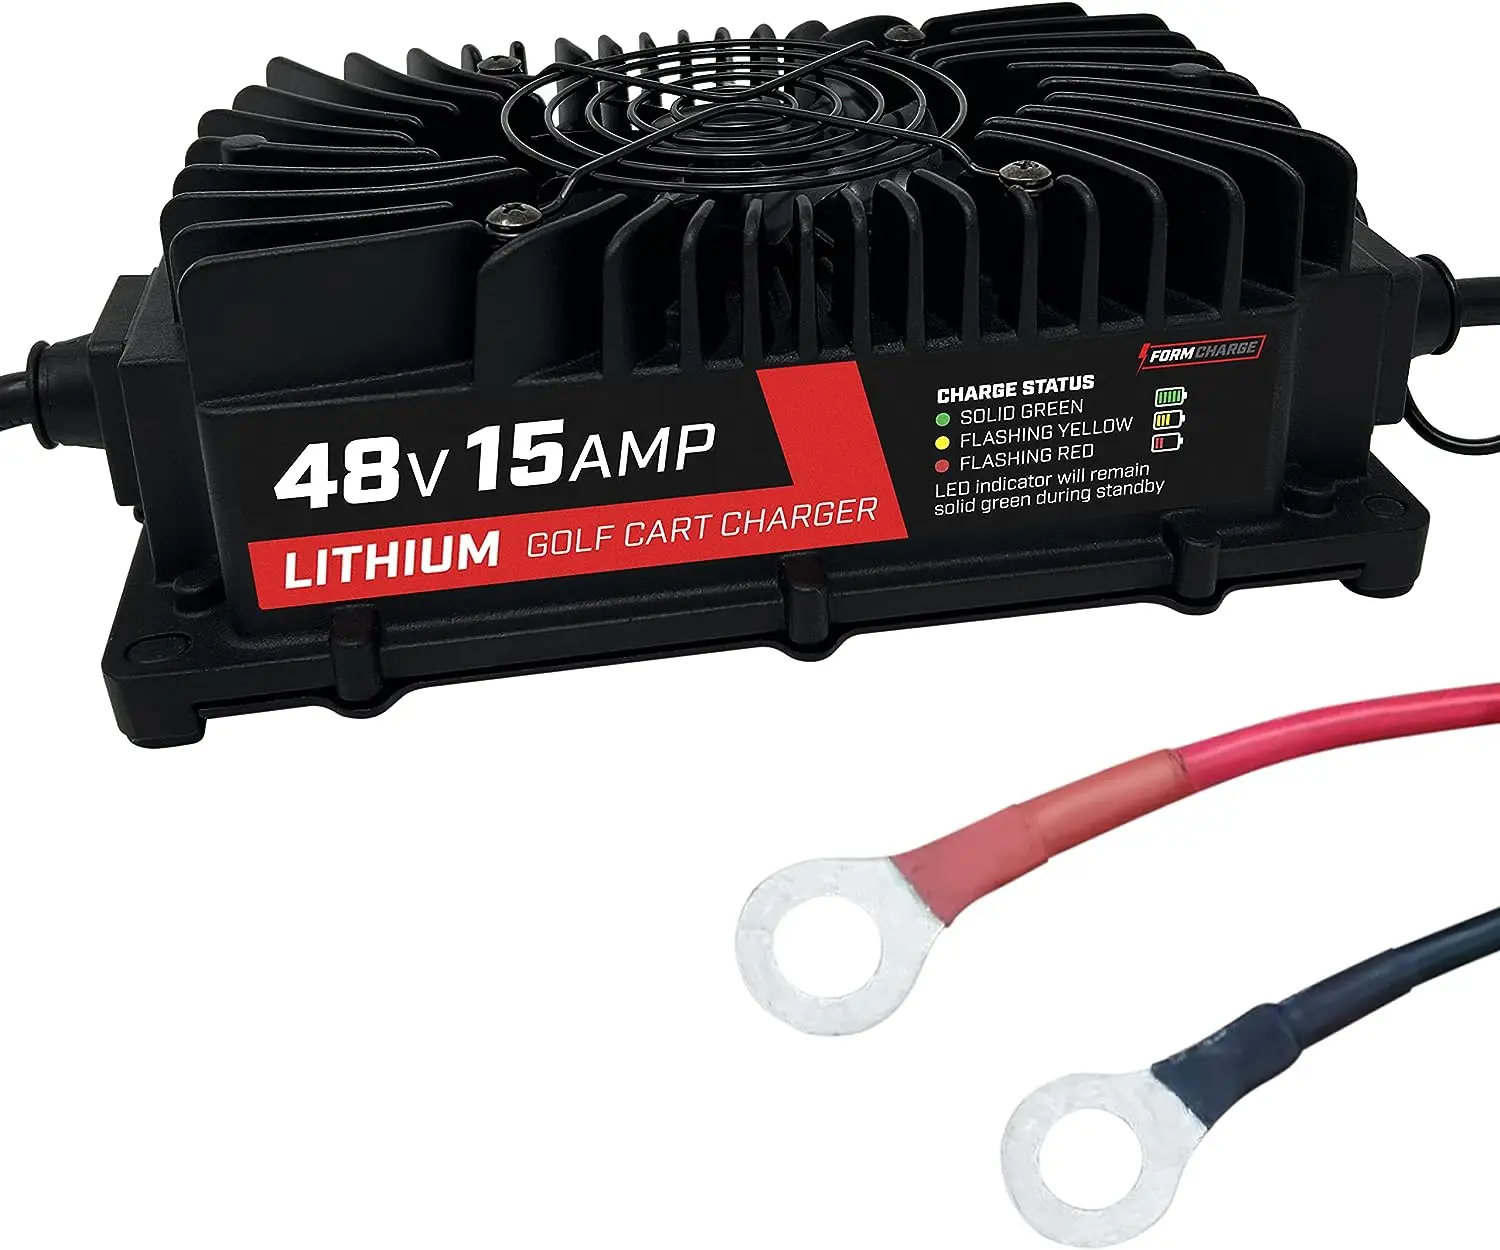 

AMP Lithium Onboard Battery Charger for 48 Volt Golf Carts